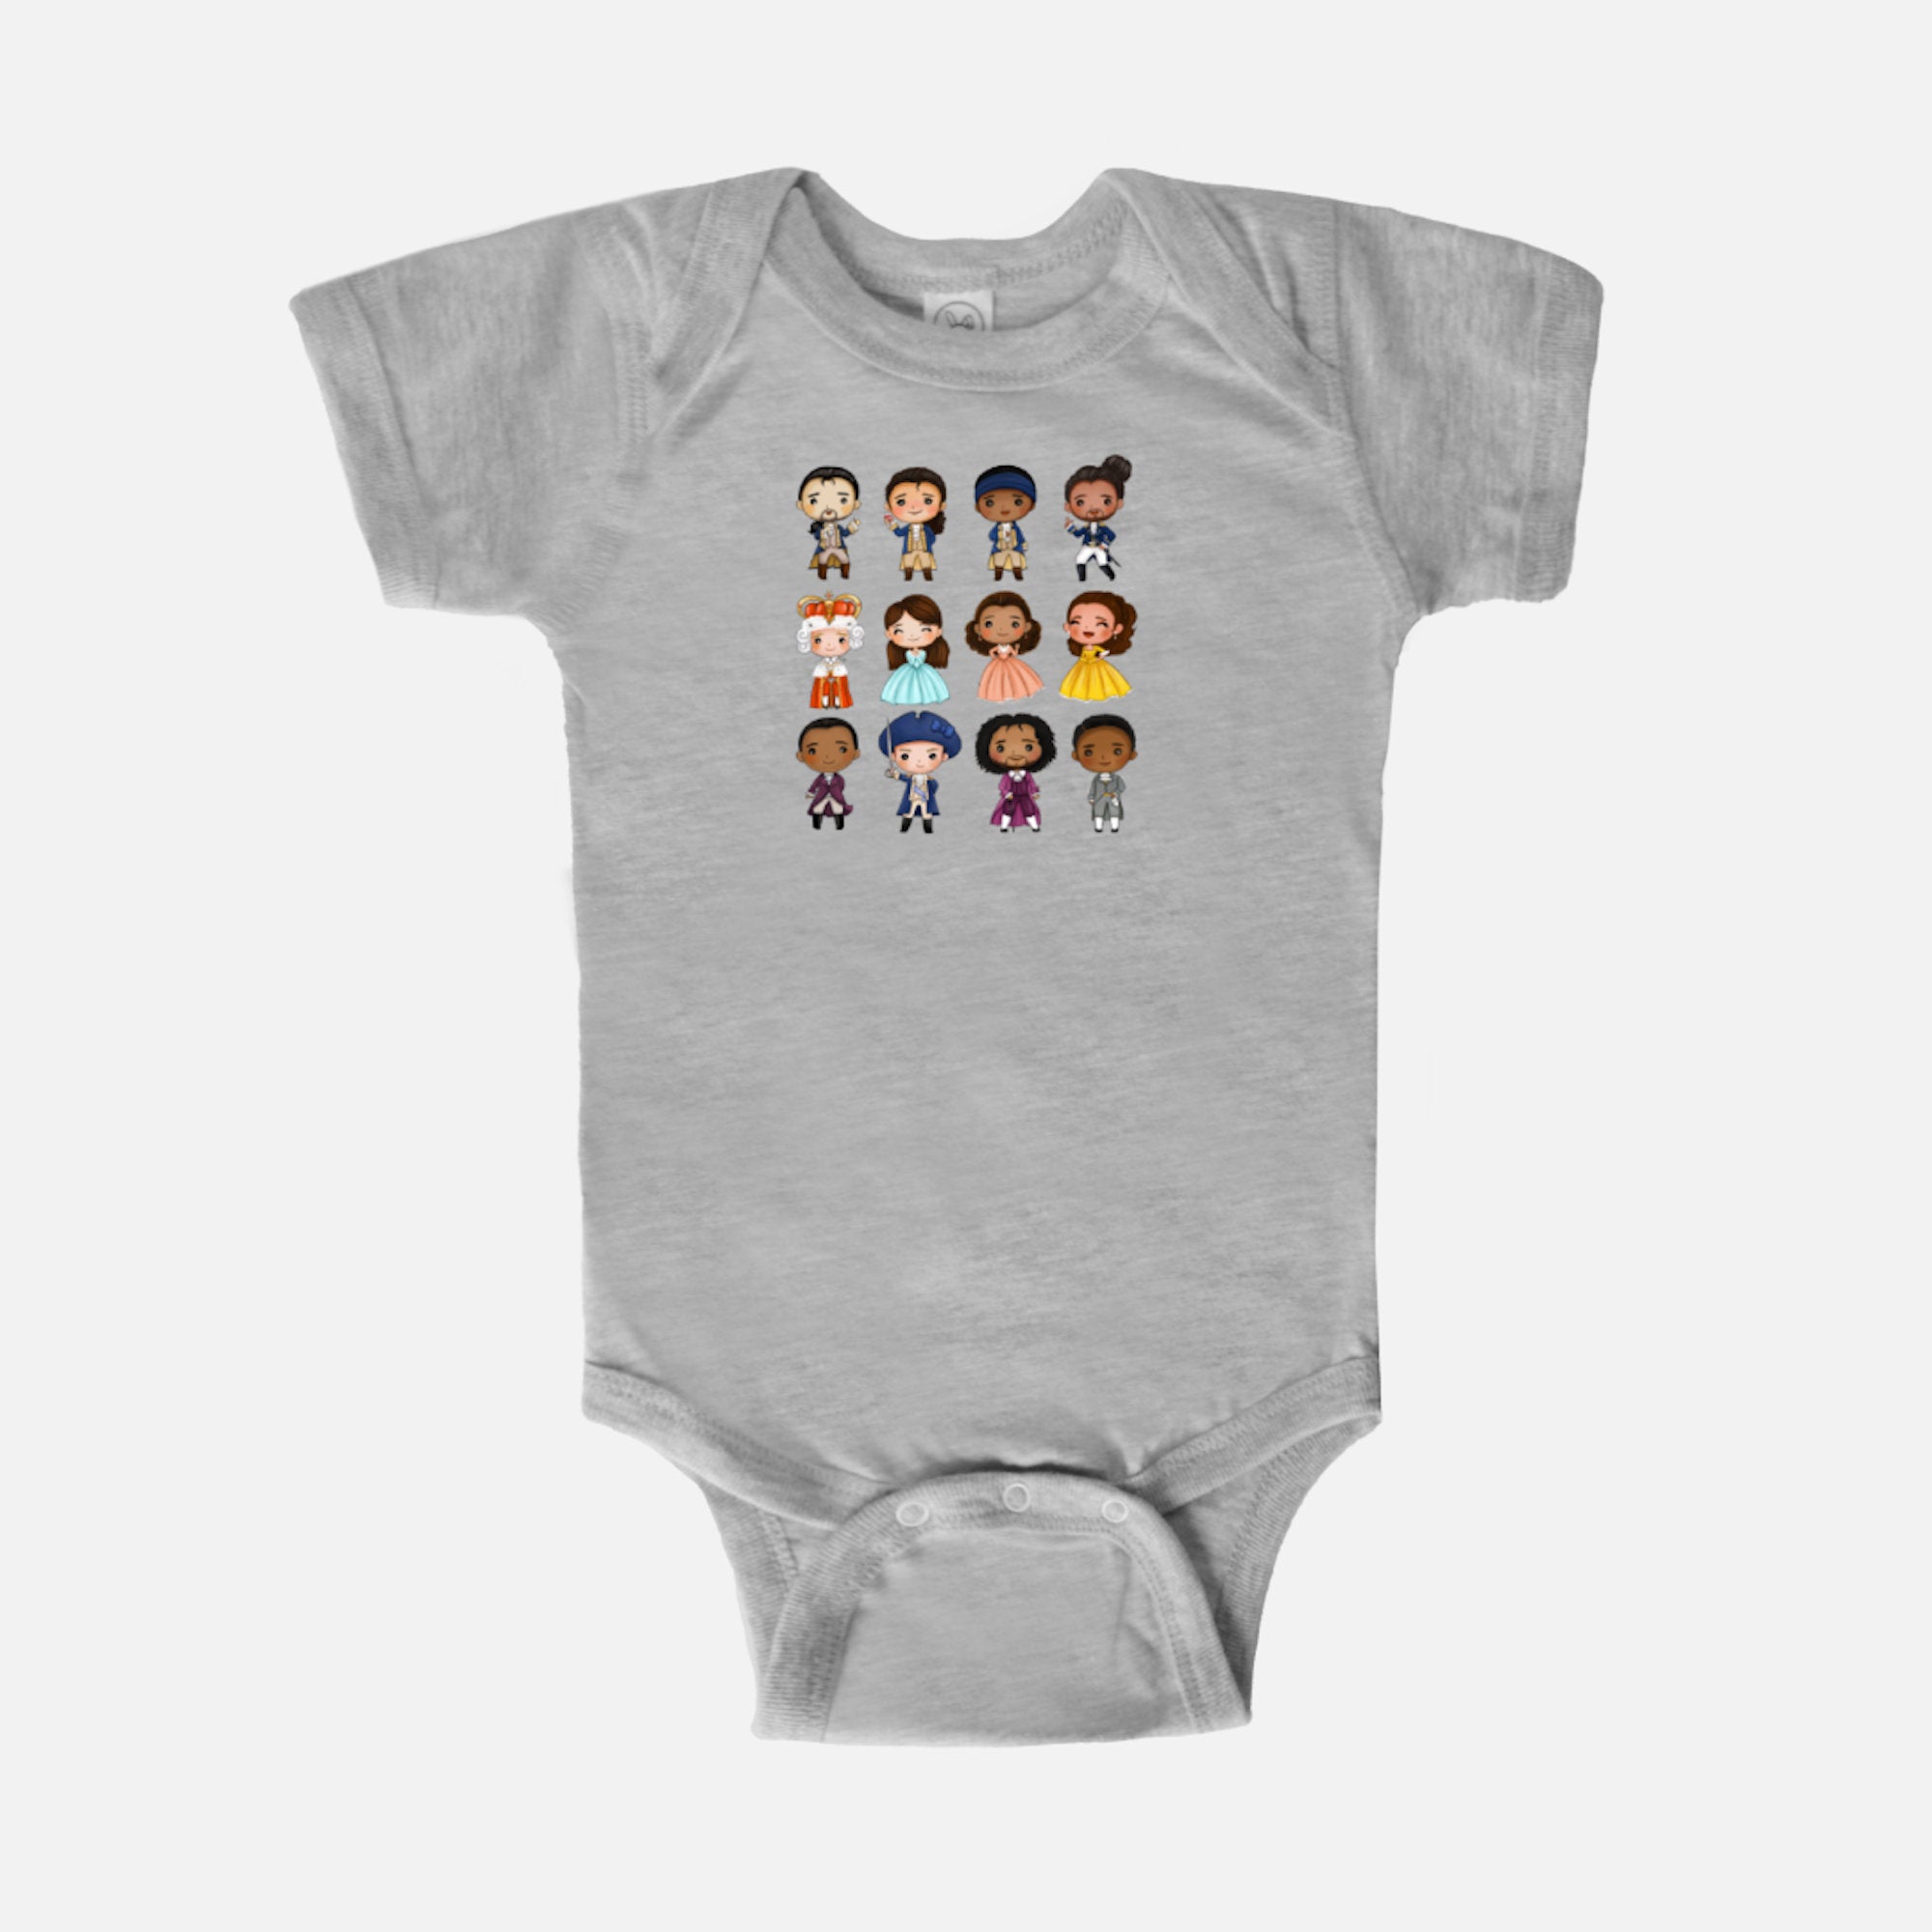 Broadway, Musical Theater, Infant, Shower Gift